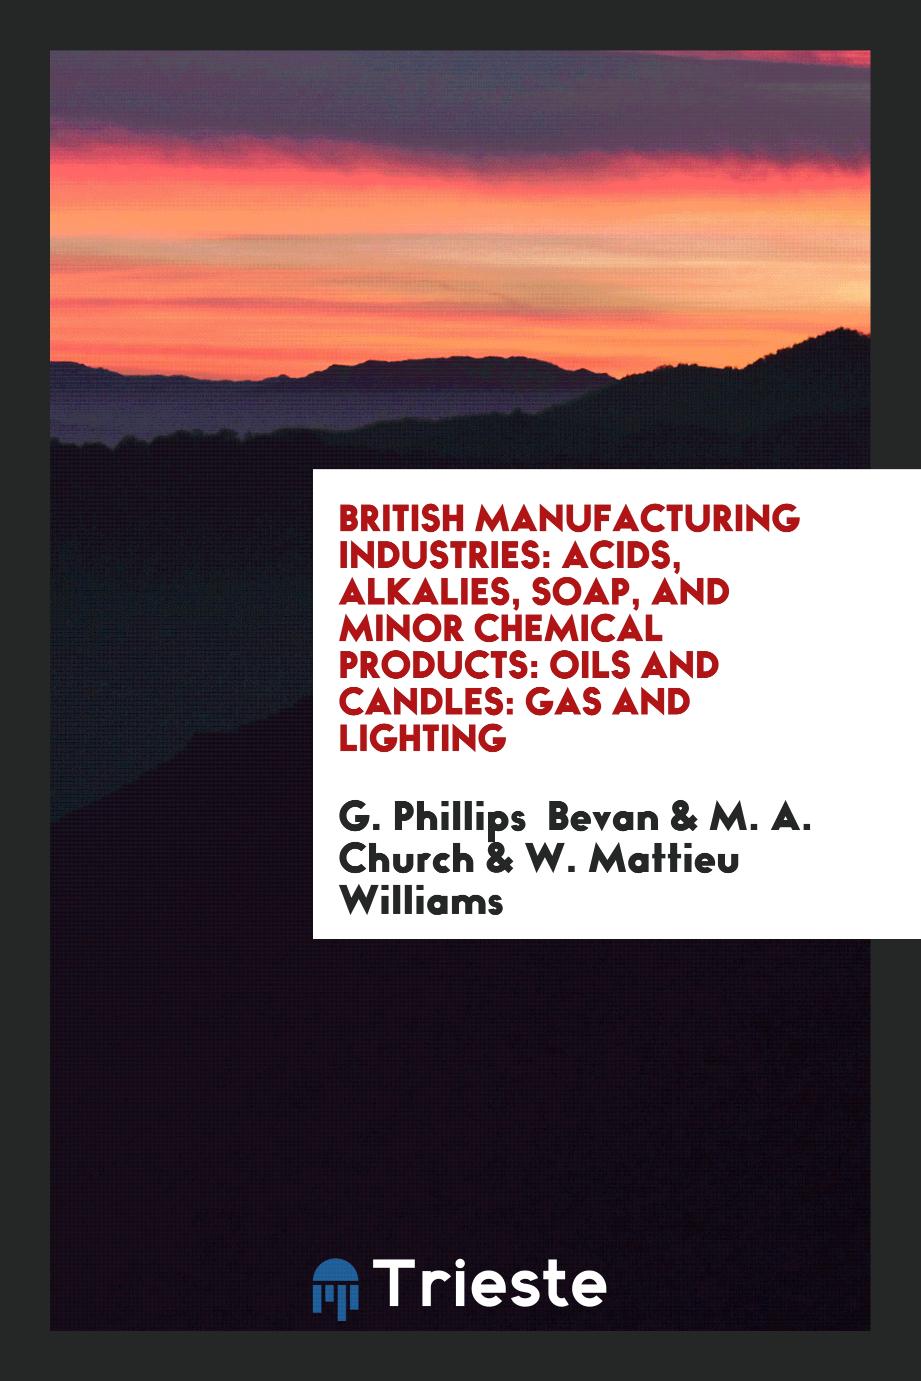 British Manufacturing Industries: Acids, Alkalies, Soap, and Minor Chemical Products: Oils and Candles: Gas and Lighting